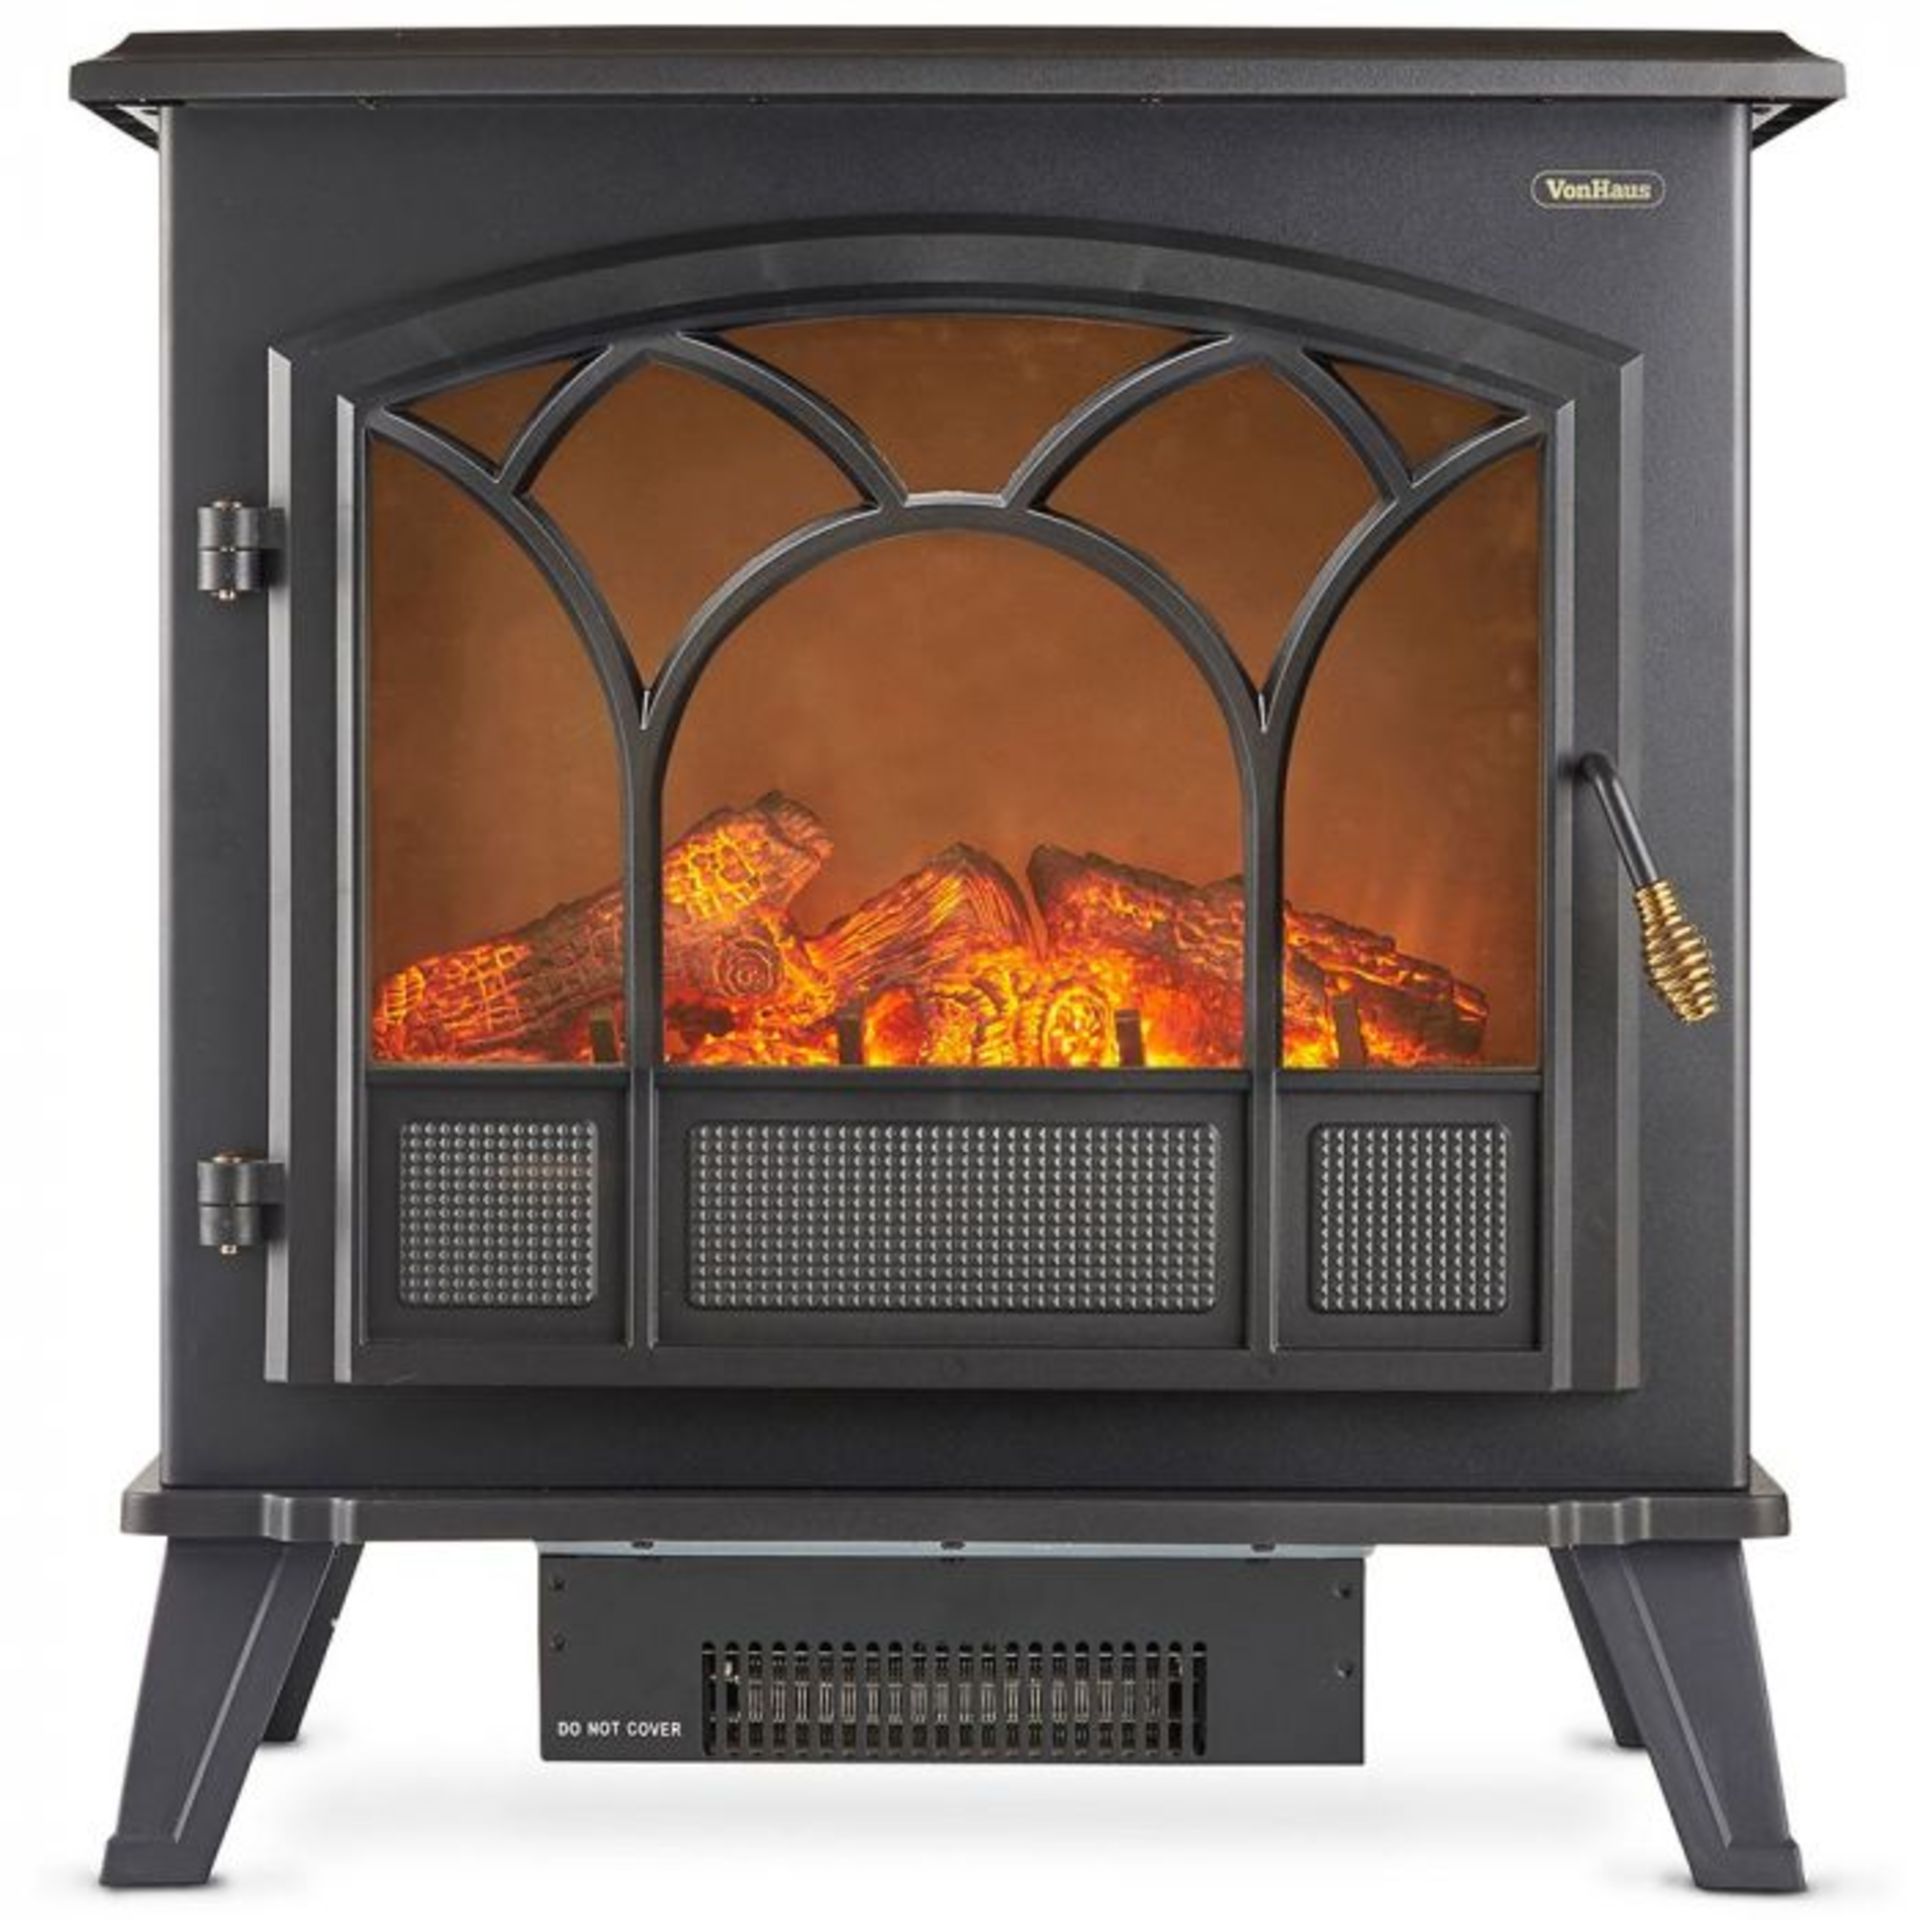 (S24) 1850W Large Black Stove Heater 1850W PORTABLE ELECTRIC STOVE HEATER – classically-desi... - Image 3 of 4